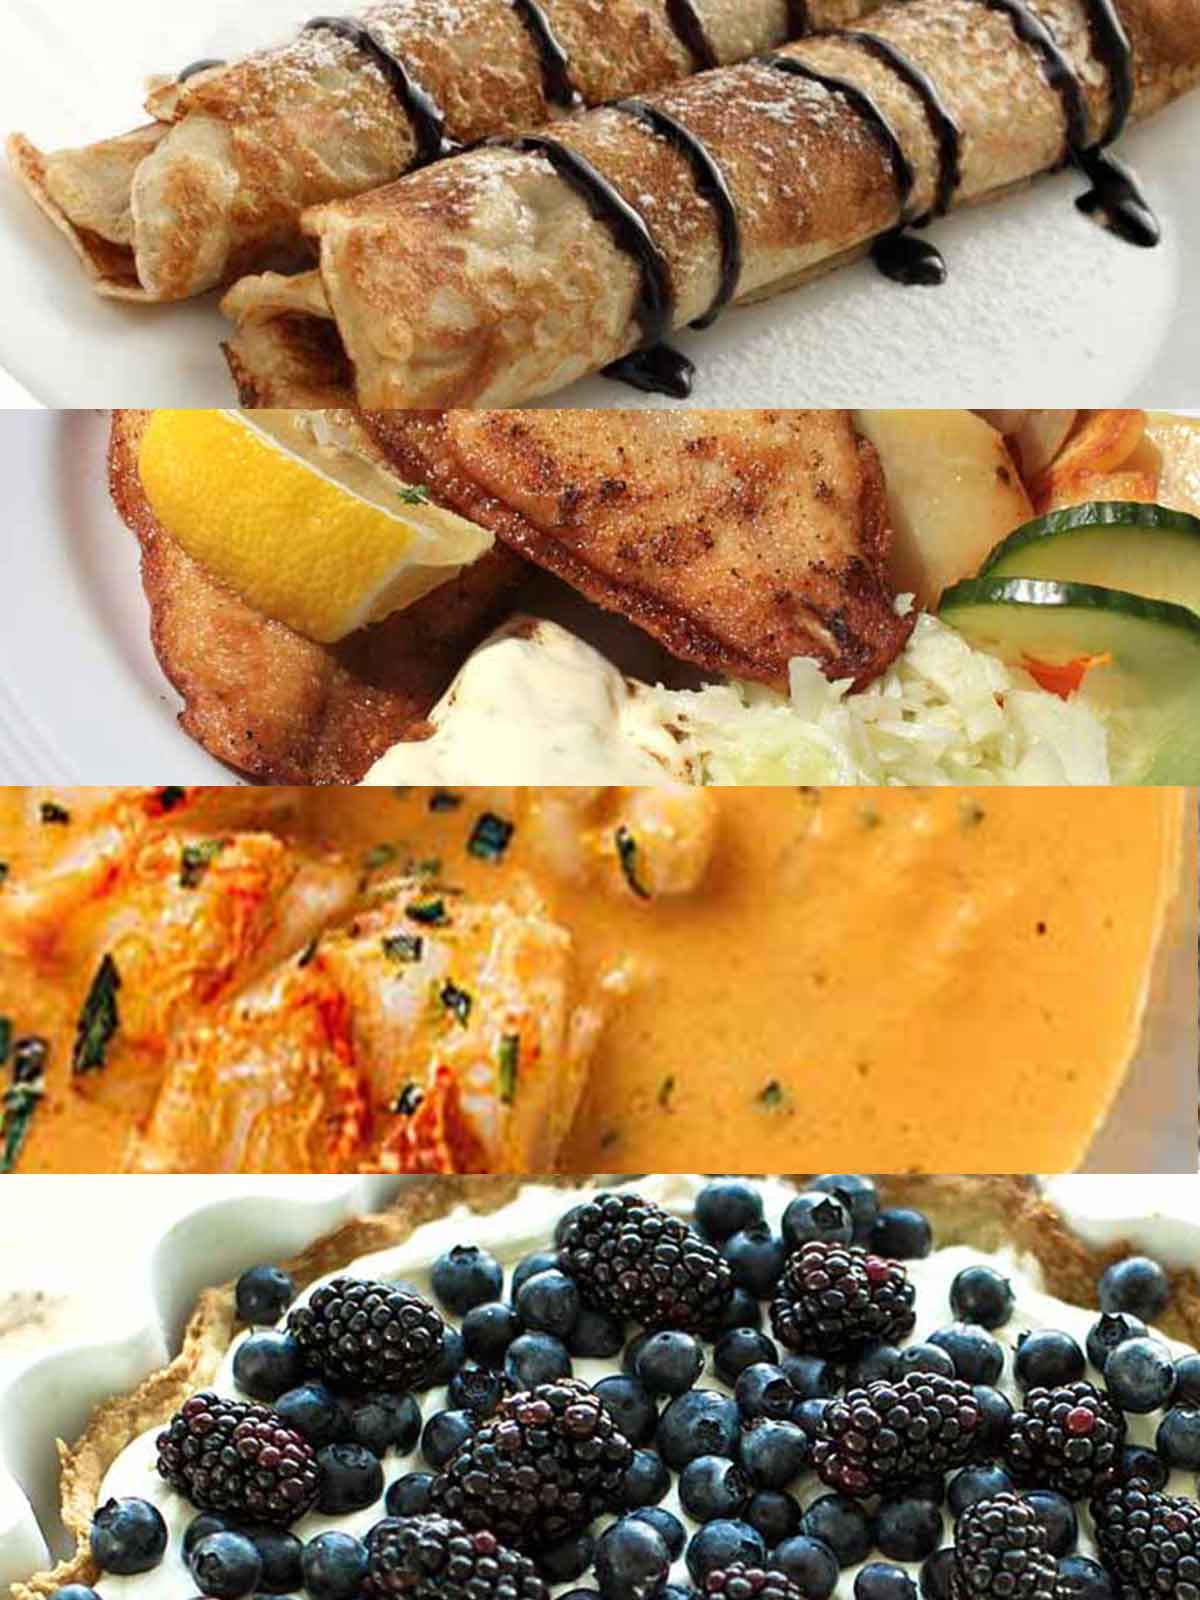 Collage of various Icelandic dishes